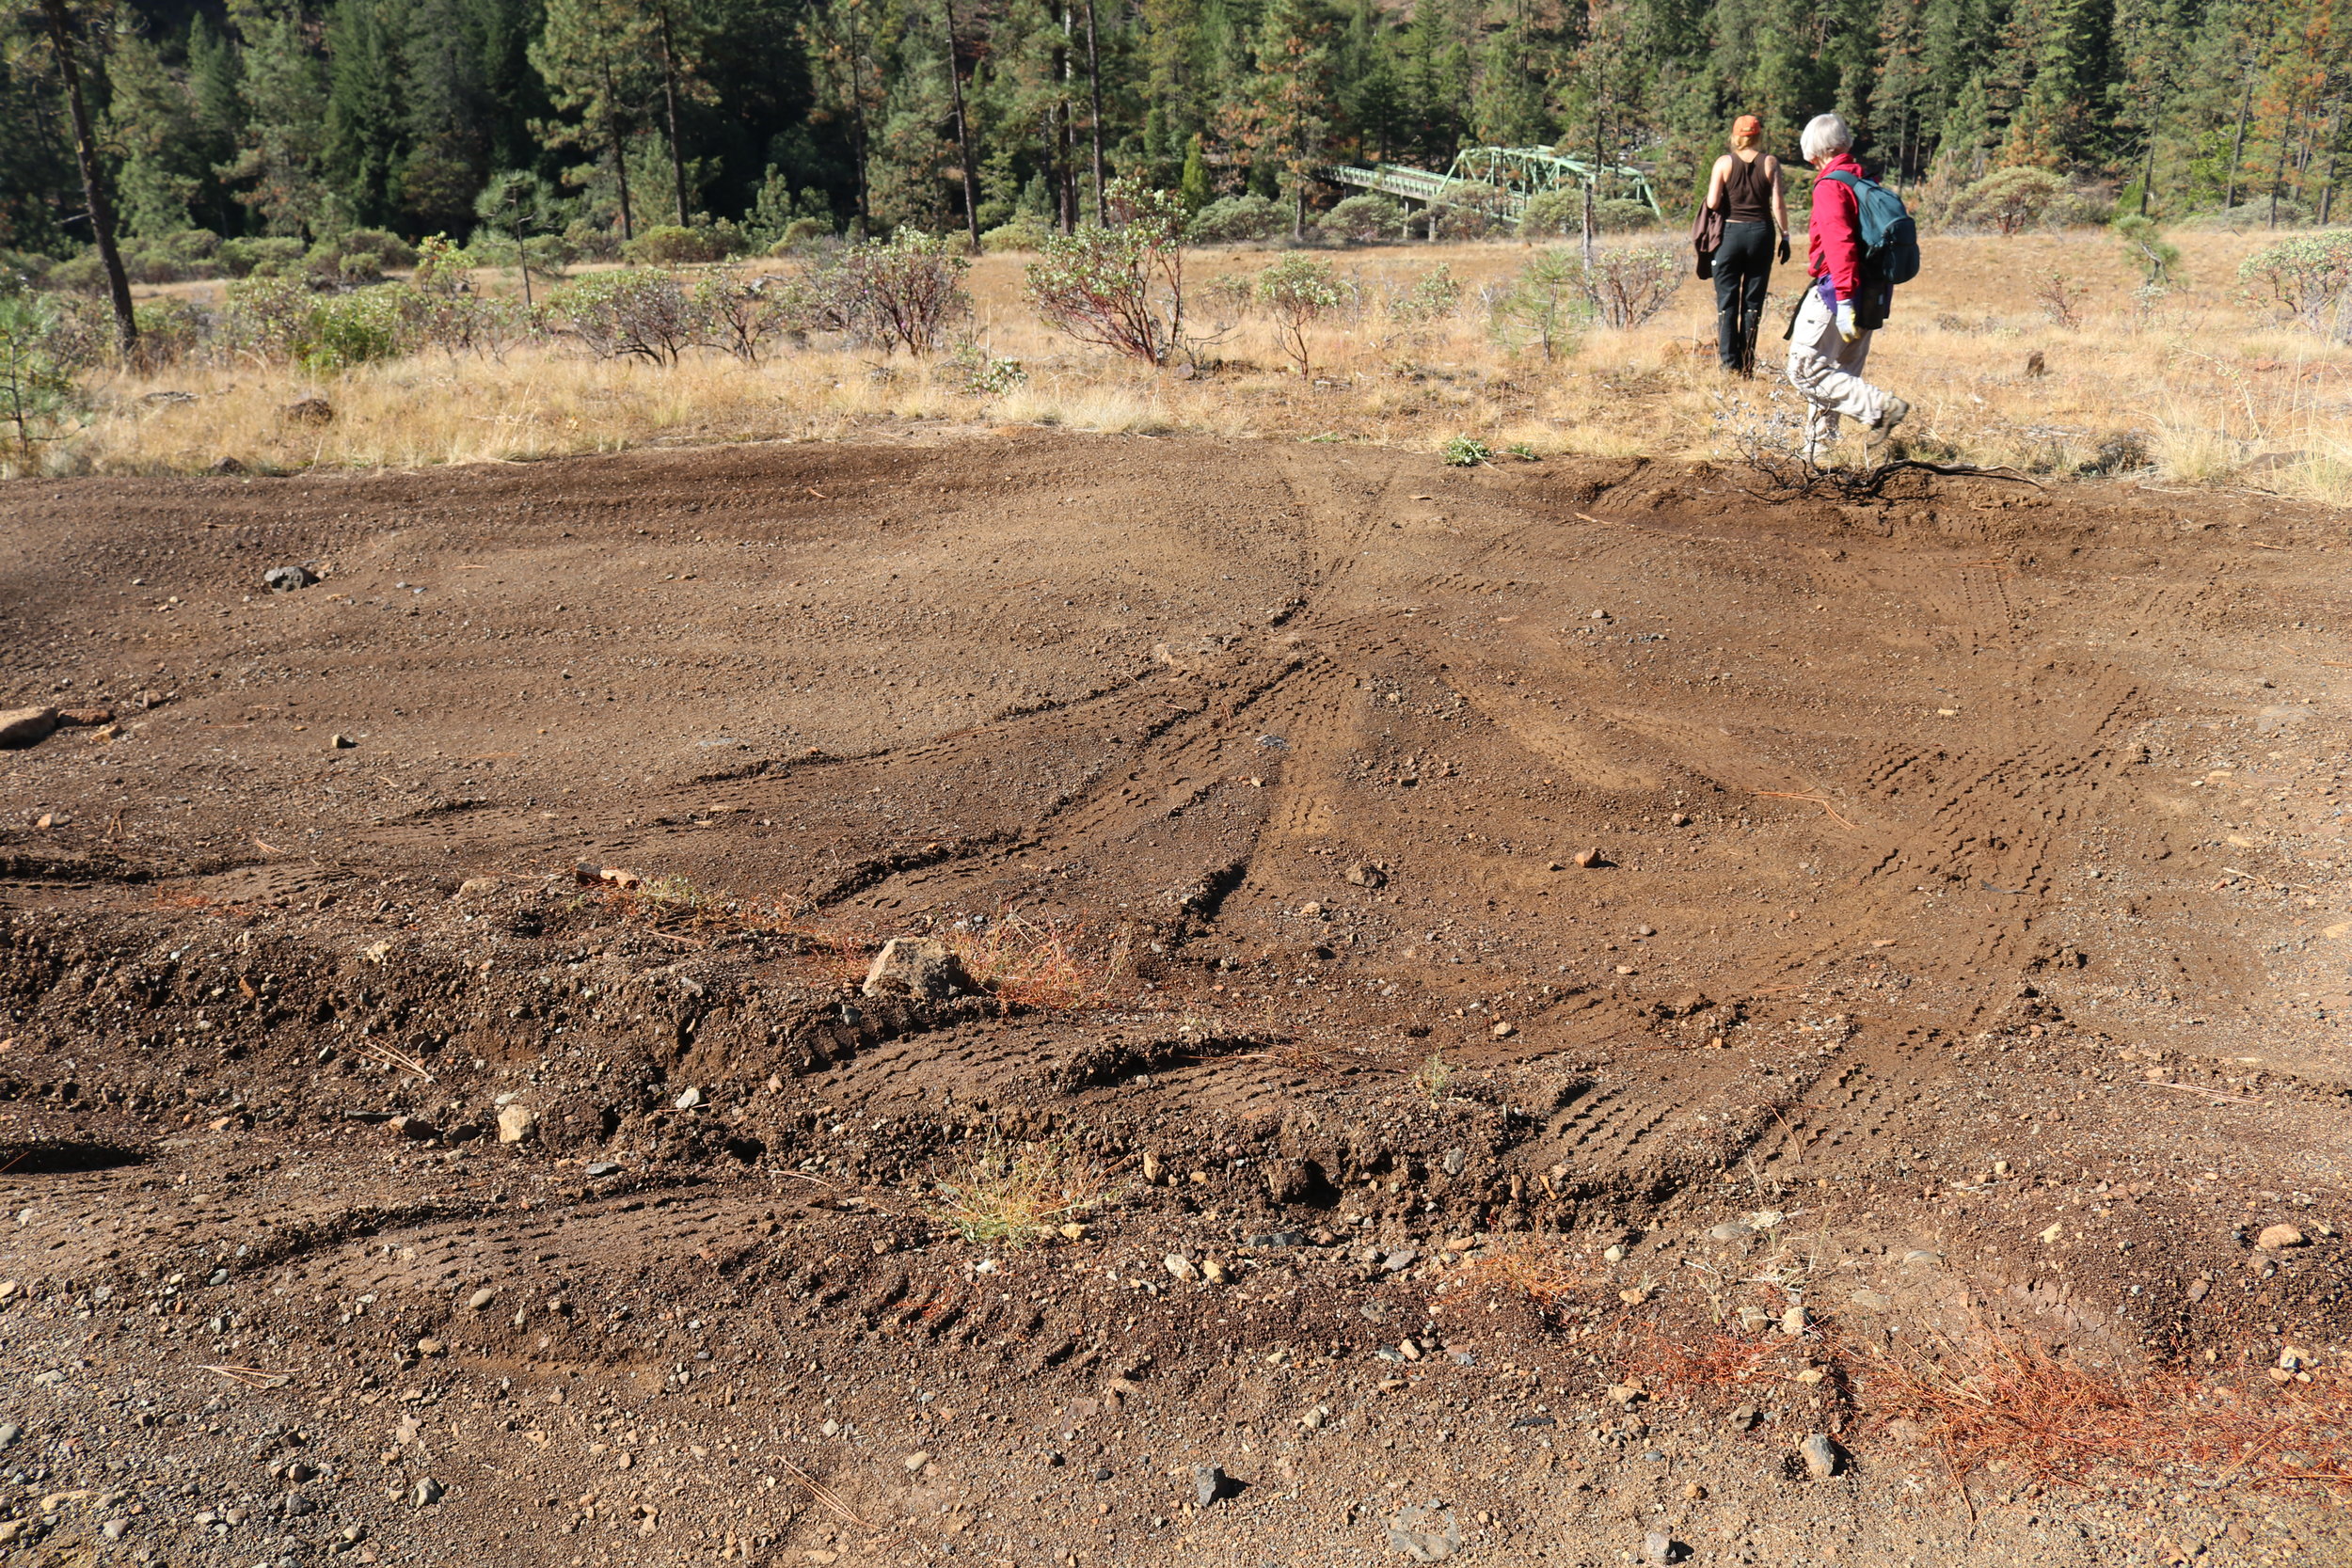  The MVUM is to be enforced by the Forest Service, however they are neglecting to do so, allowing this botanical wonderland at Eight Dollar Mountain to be turned into an OHV playground. Once soil has been compacted, vegetation has a difficult time re